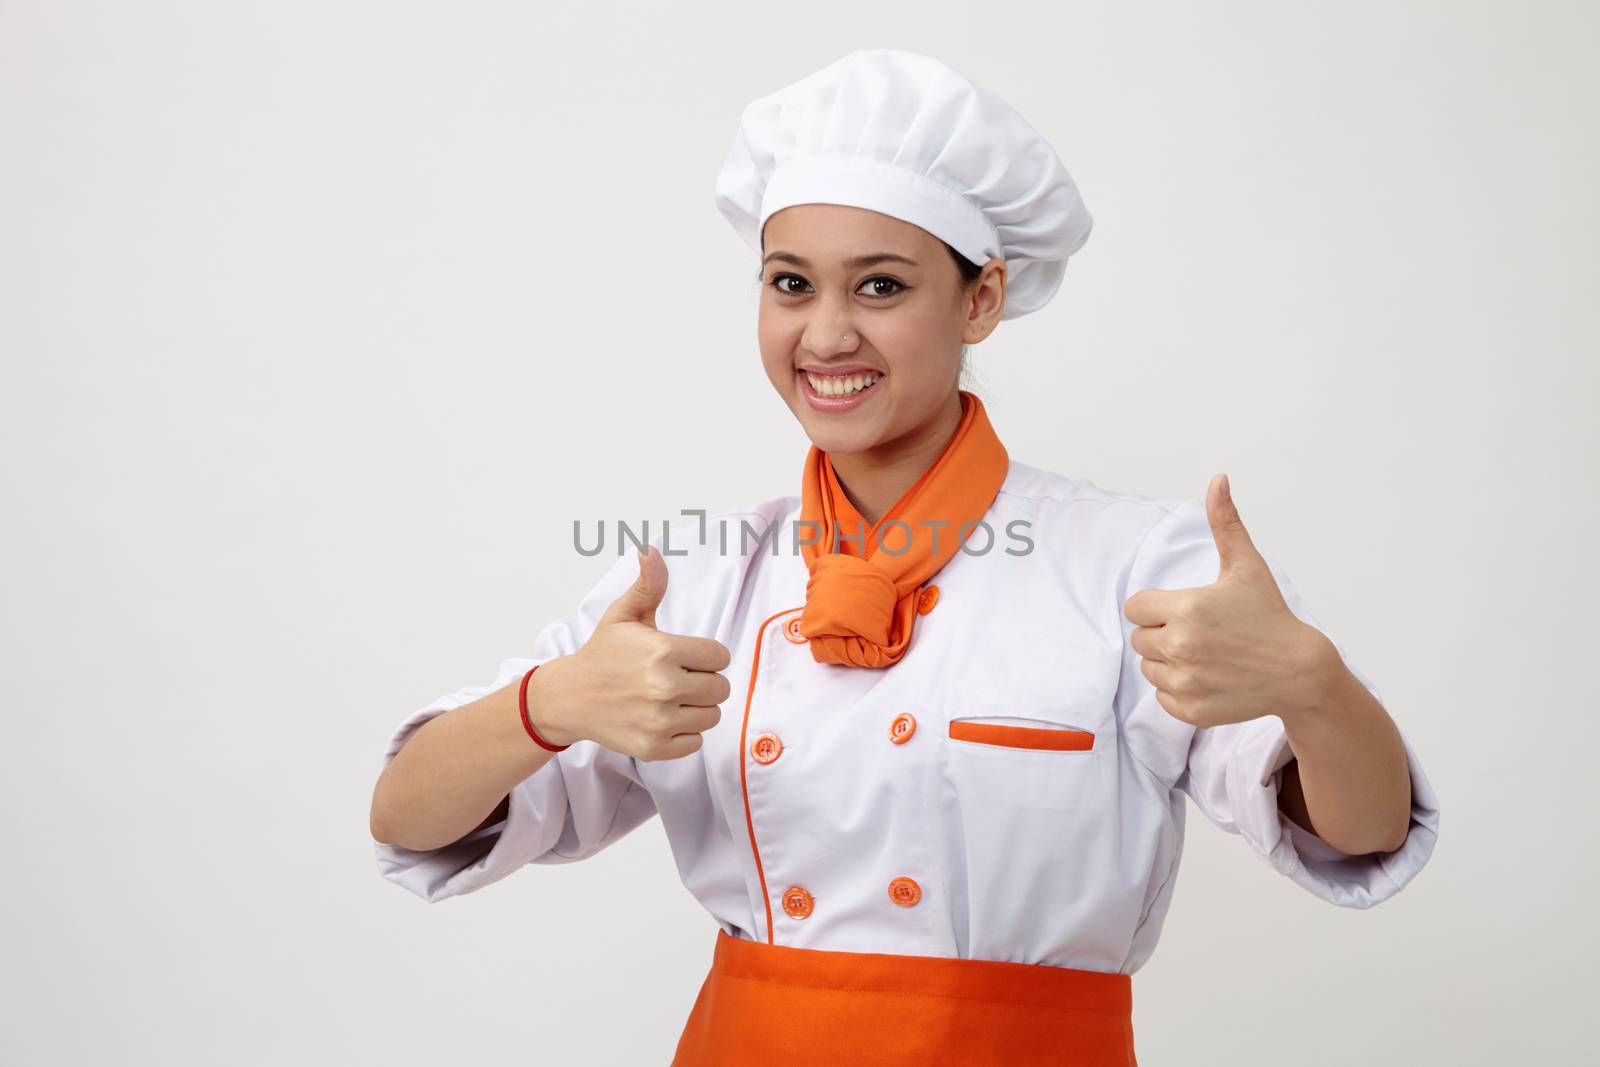 Portrait of a Indian woman with chef uniform